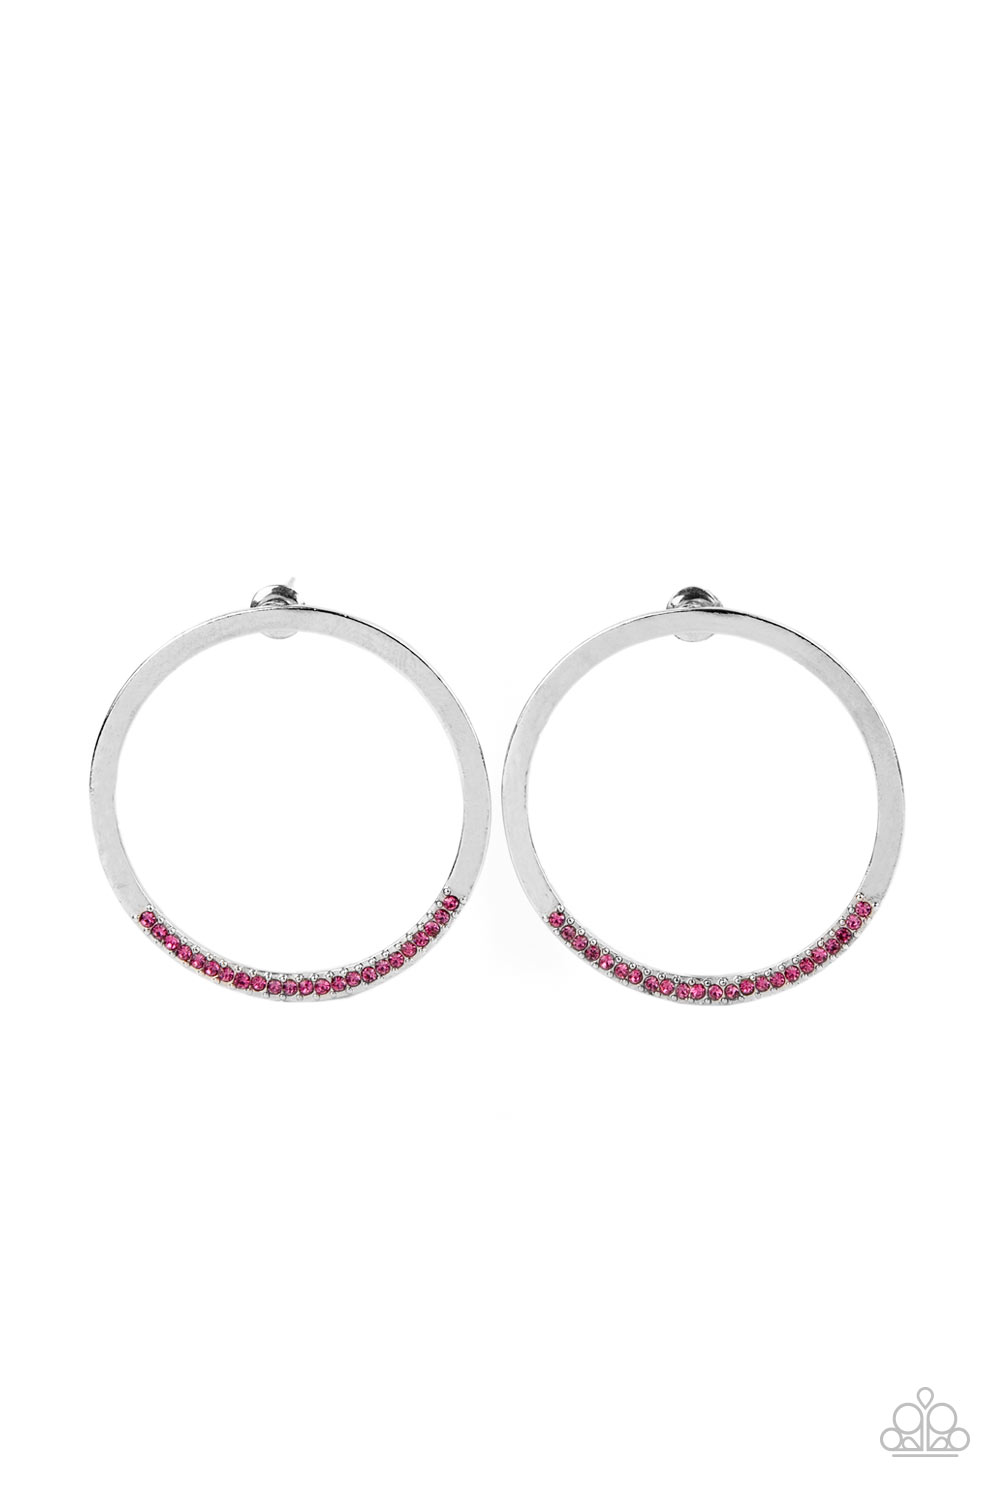 Paparazzi Accessories Spot on Opulence - Pink Earrings - Lady T Accessories